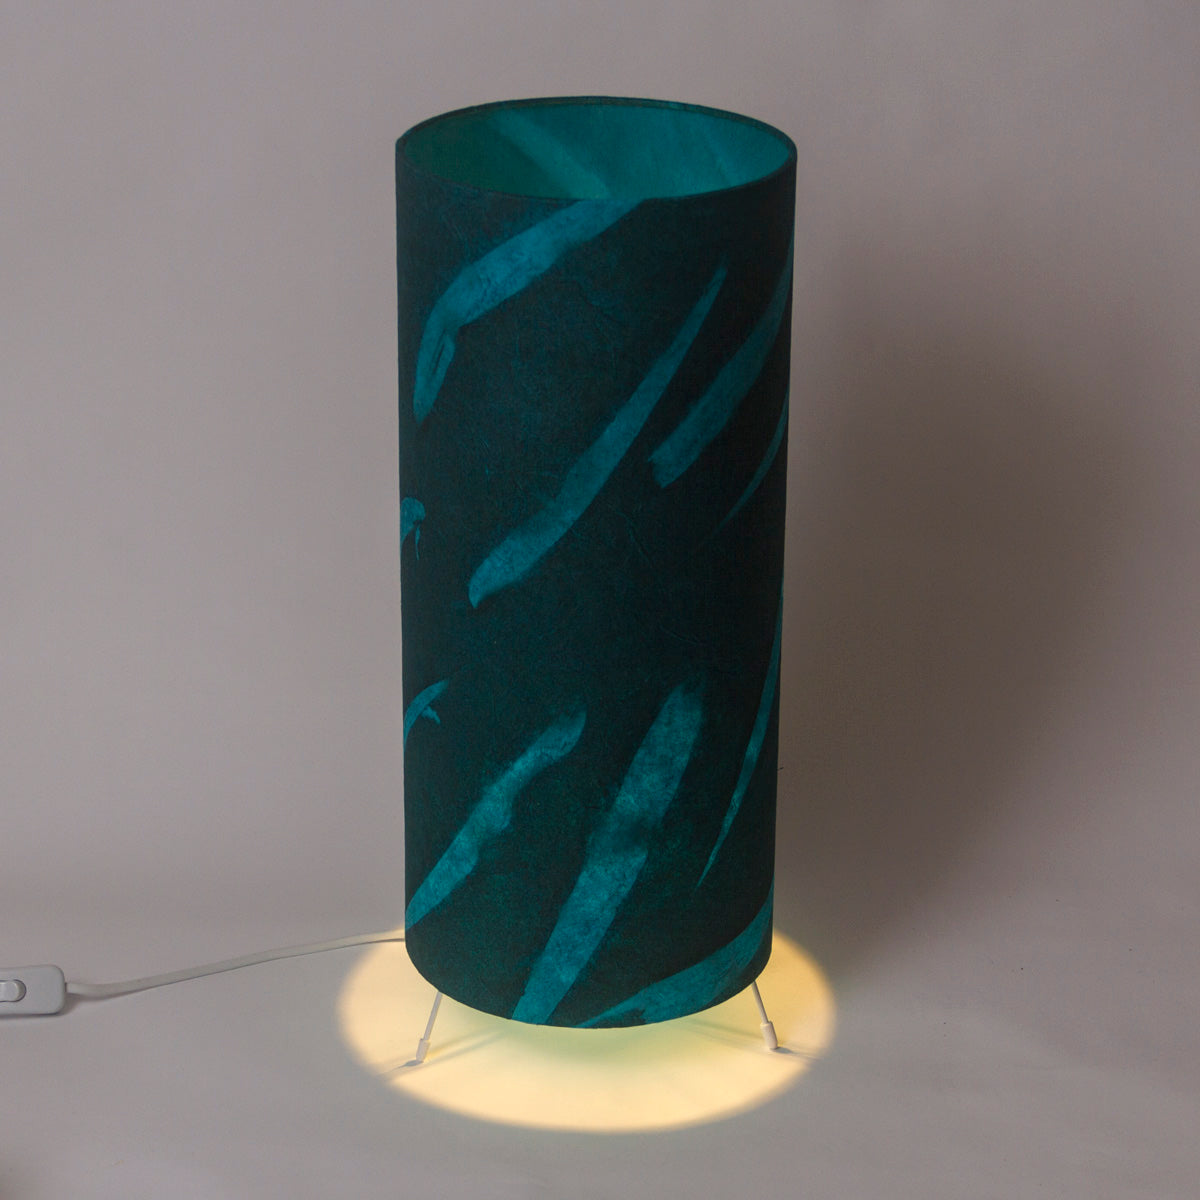 Free Standing Table Lamp Large - P99 - Teal Bamboo Resistance dyed Lokta